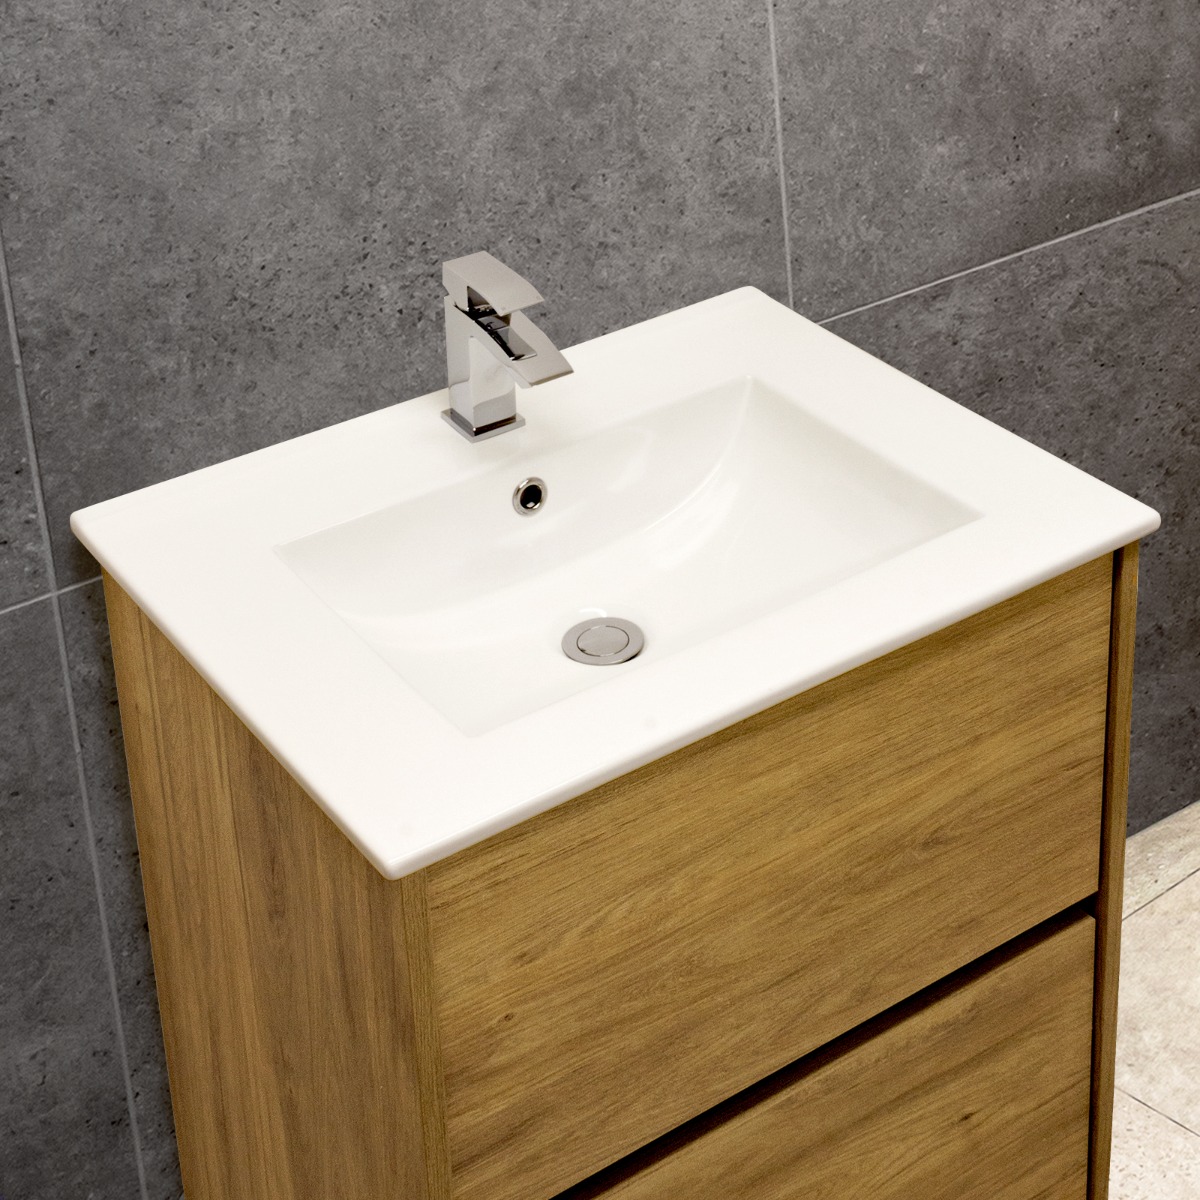 4001A Ceramic 61cm Thin-Edge Inset Basin with Scooped Bowl